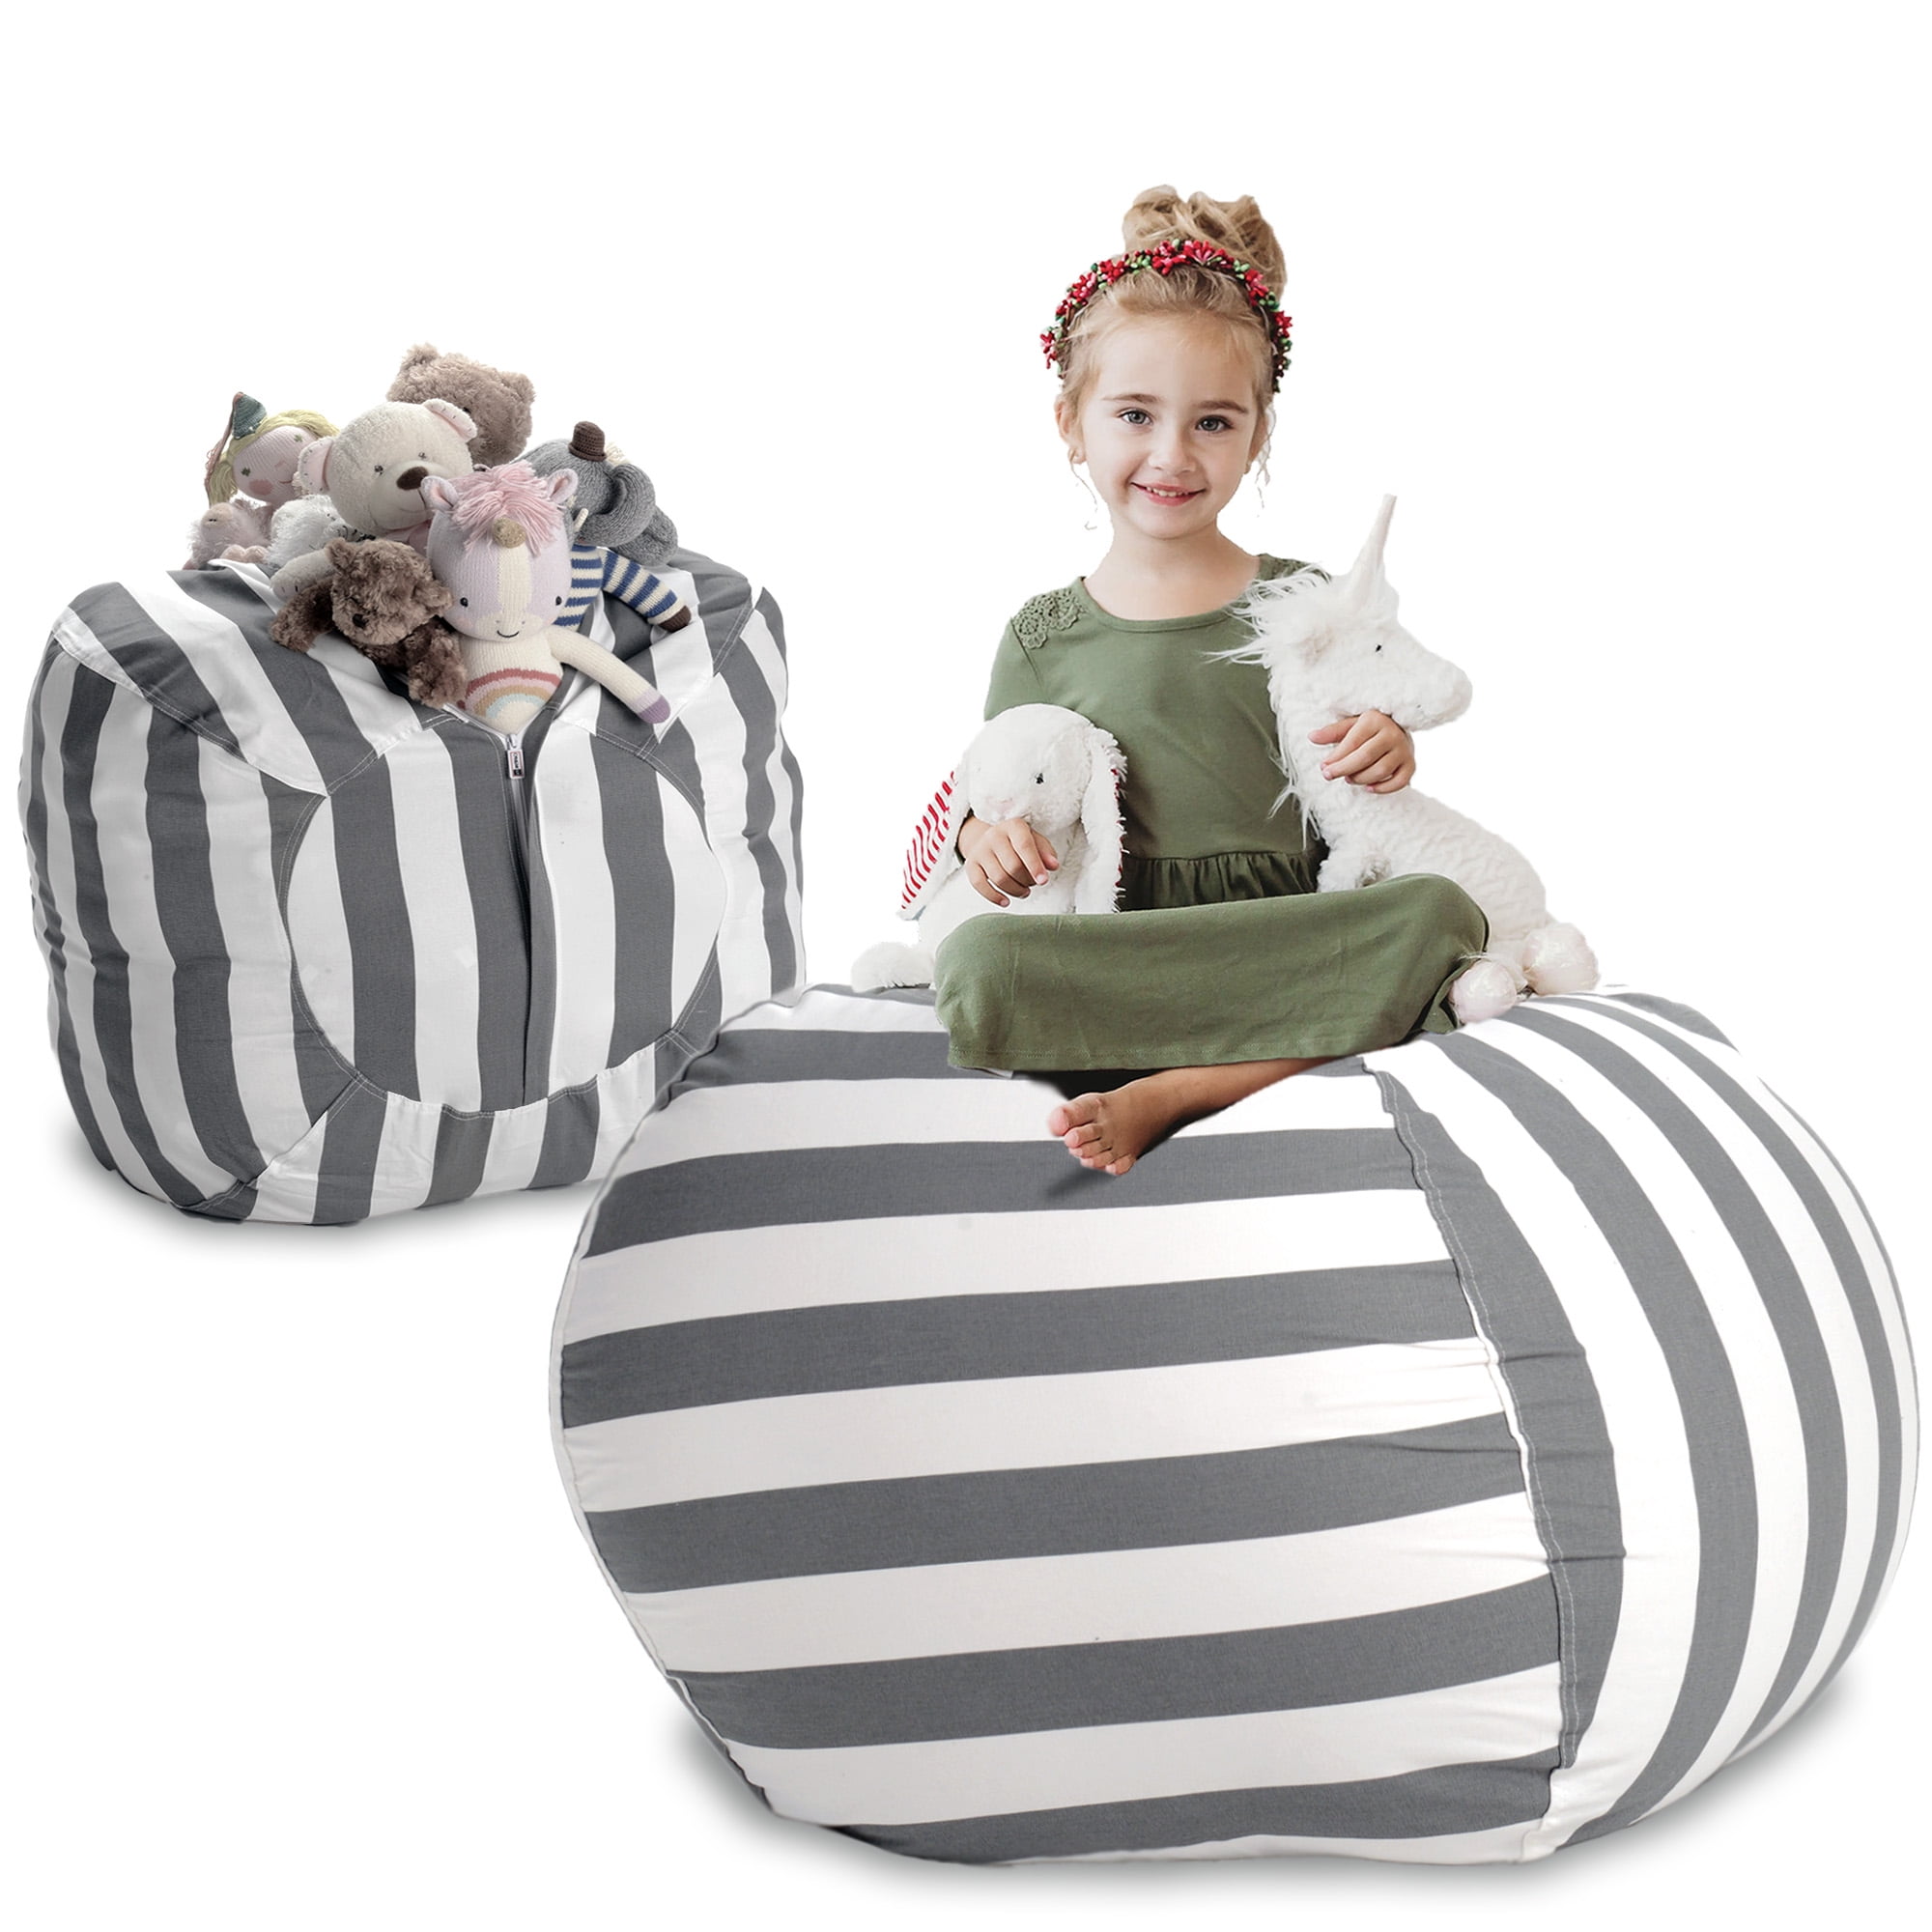 Fits a Lot of Stuffed Animals Stuffed Animal Storage Bean Bag Chair Bean Bag Cover for Organizing Kid’s Room Large/Gray Stripe 